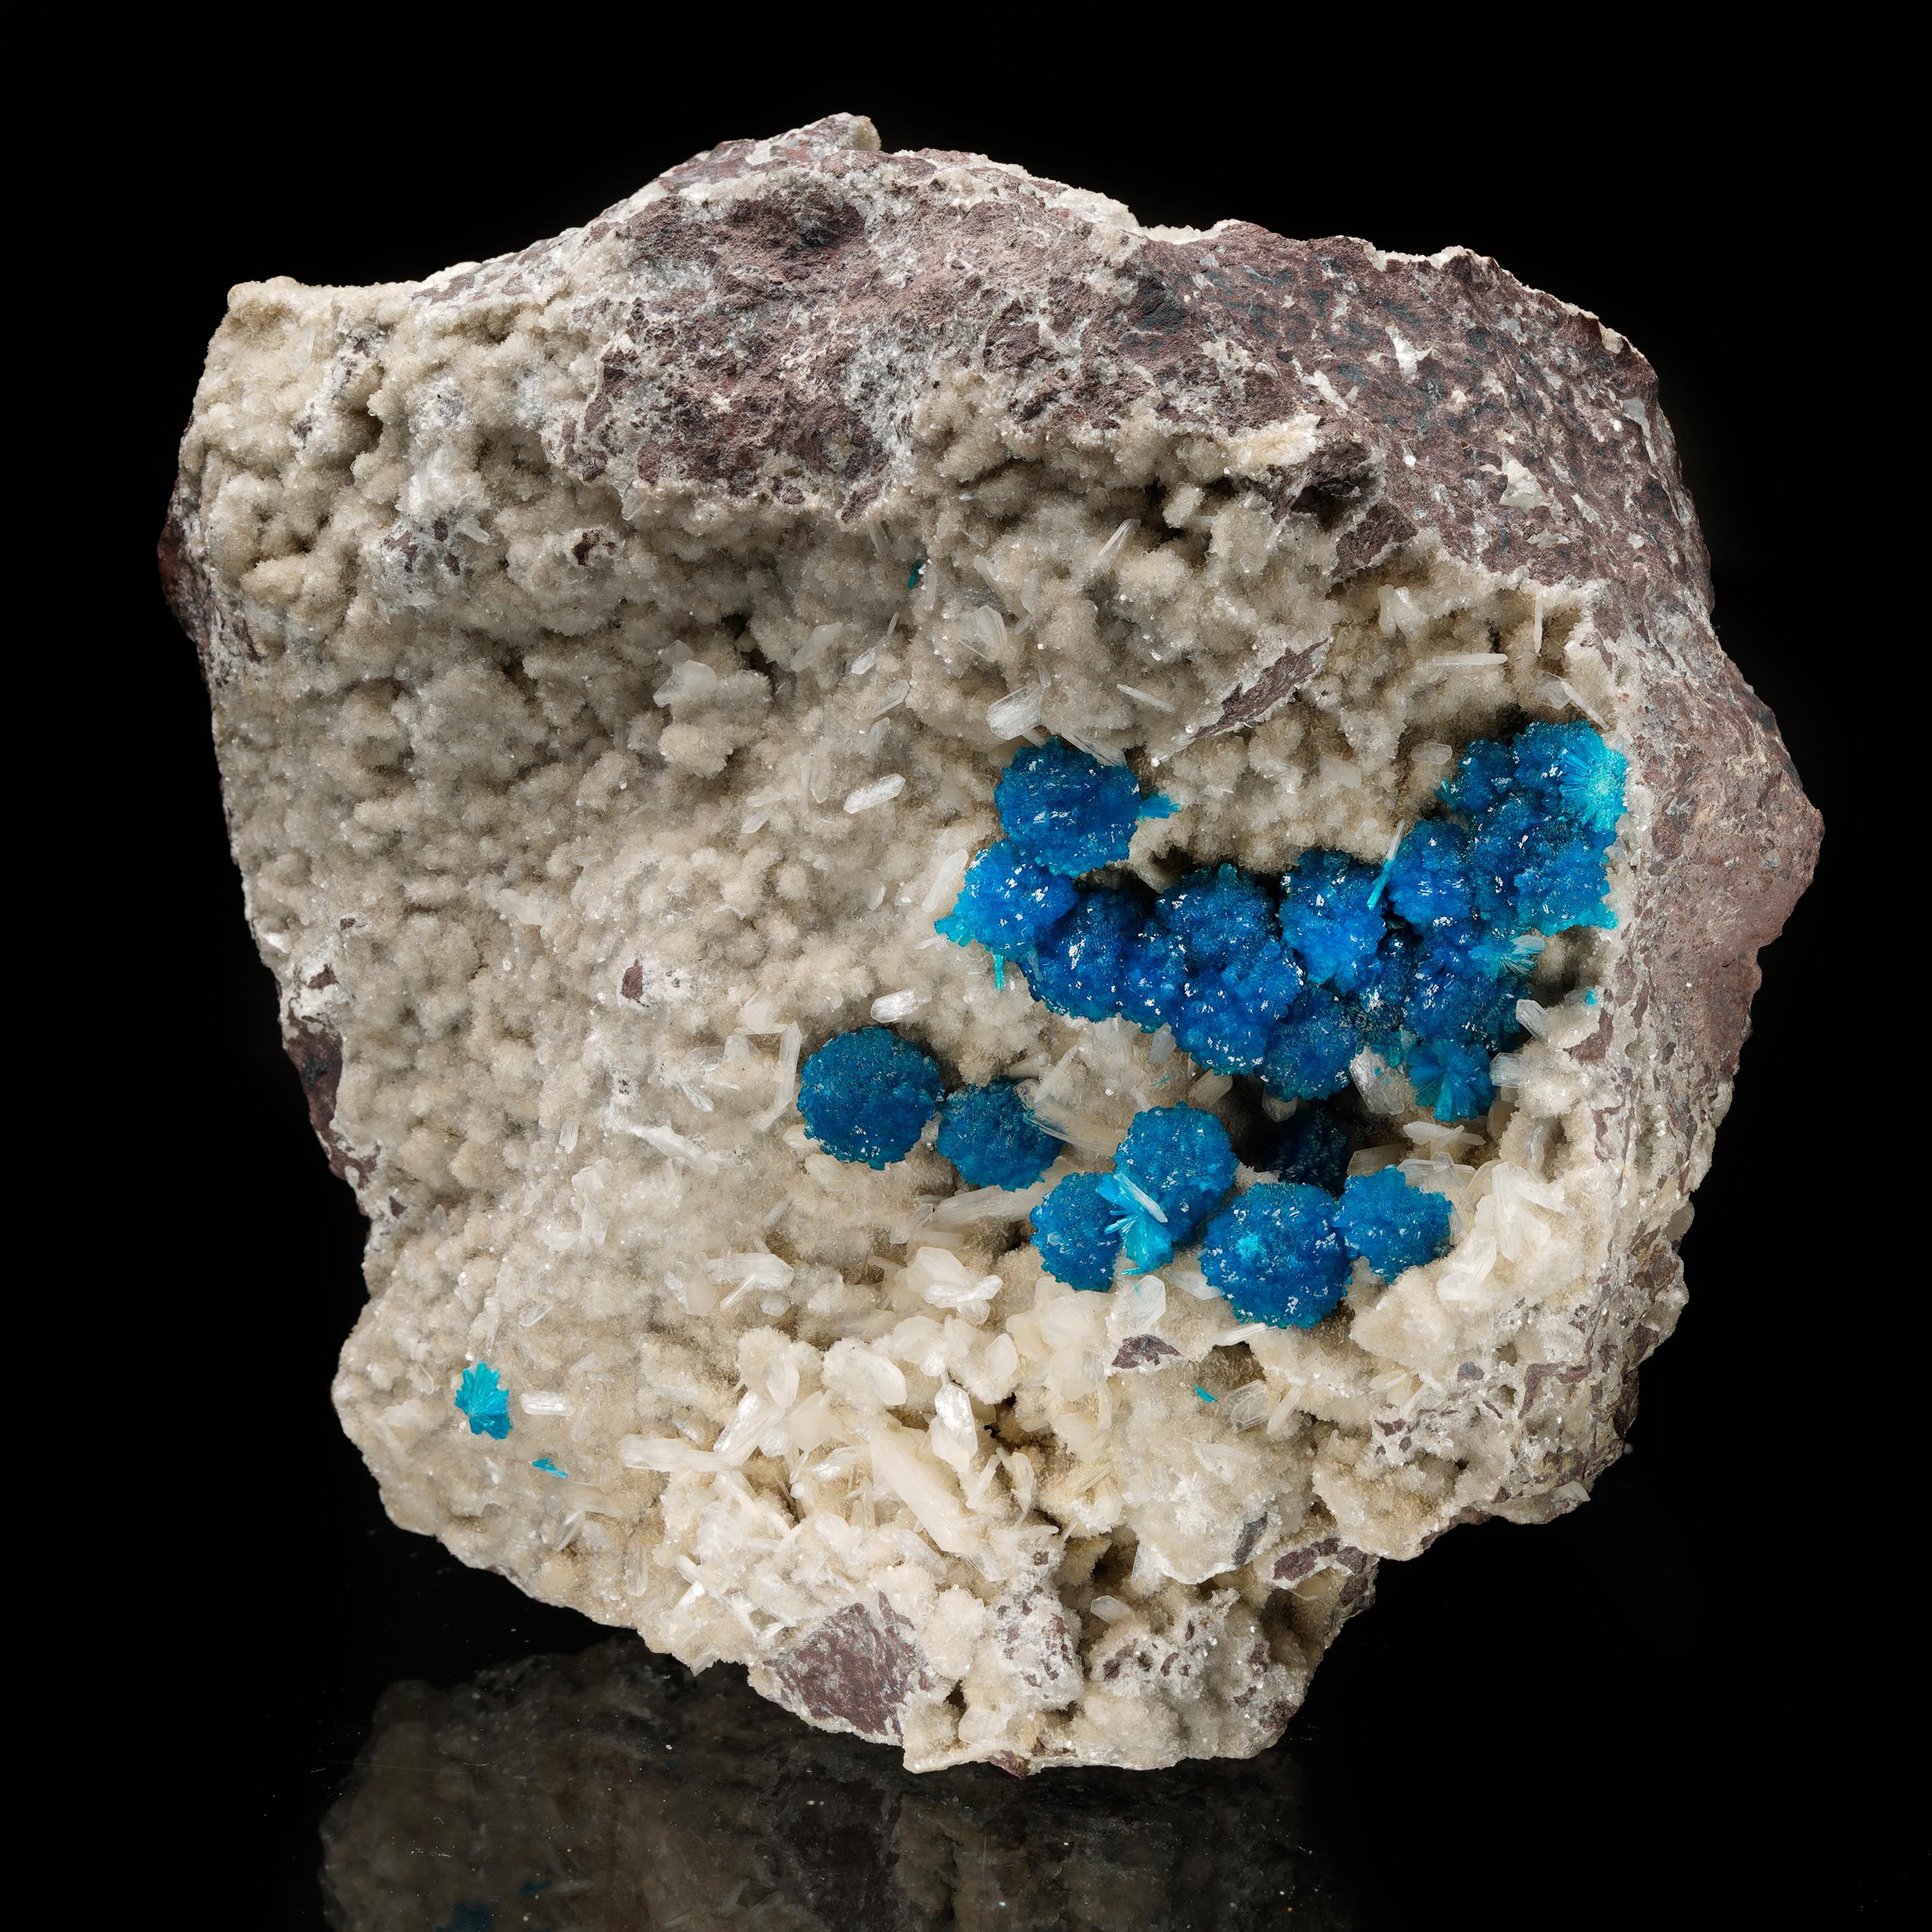 This is a fine specimen of a dense cluster of deeply pigmented cavansite balls on a lustrous stilbite matrix out of the famous and now-inactive mines of Wagholi in Pune, India. This specimen offers abundant intact balls of gemmy, deeply pigmented